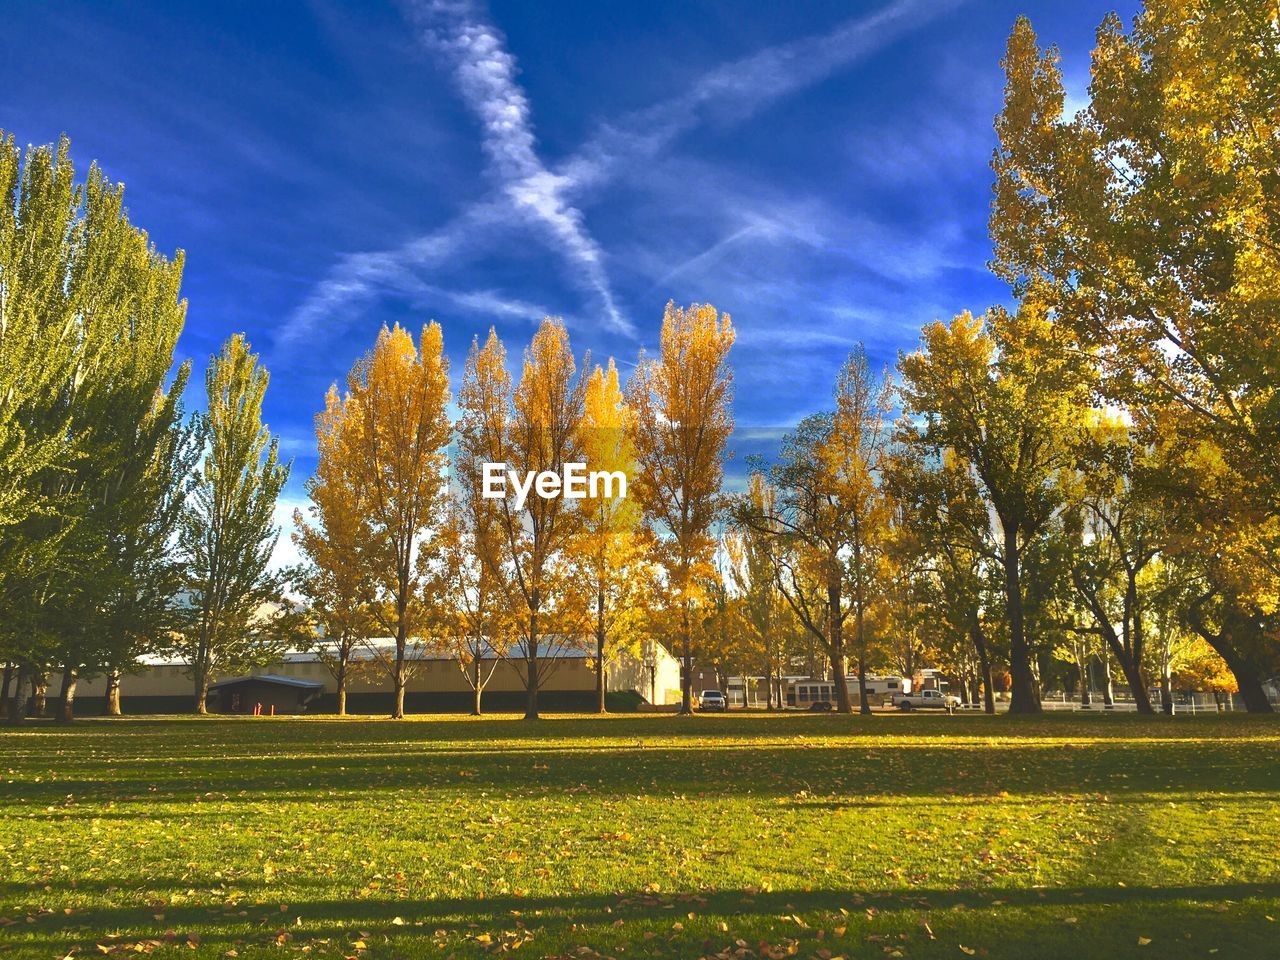 VIEW OF TREES ON GRASSY FIELD IN PARK